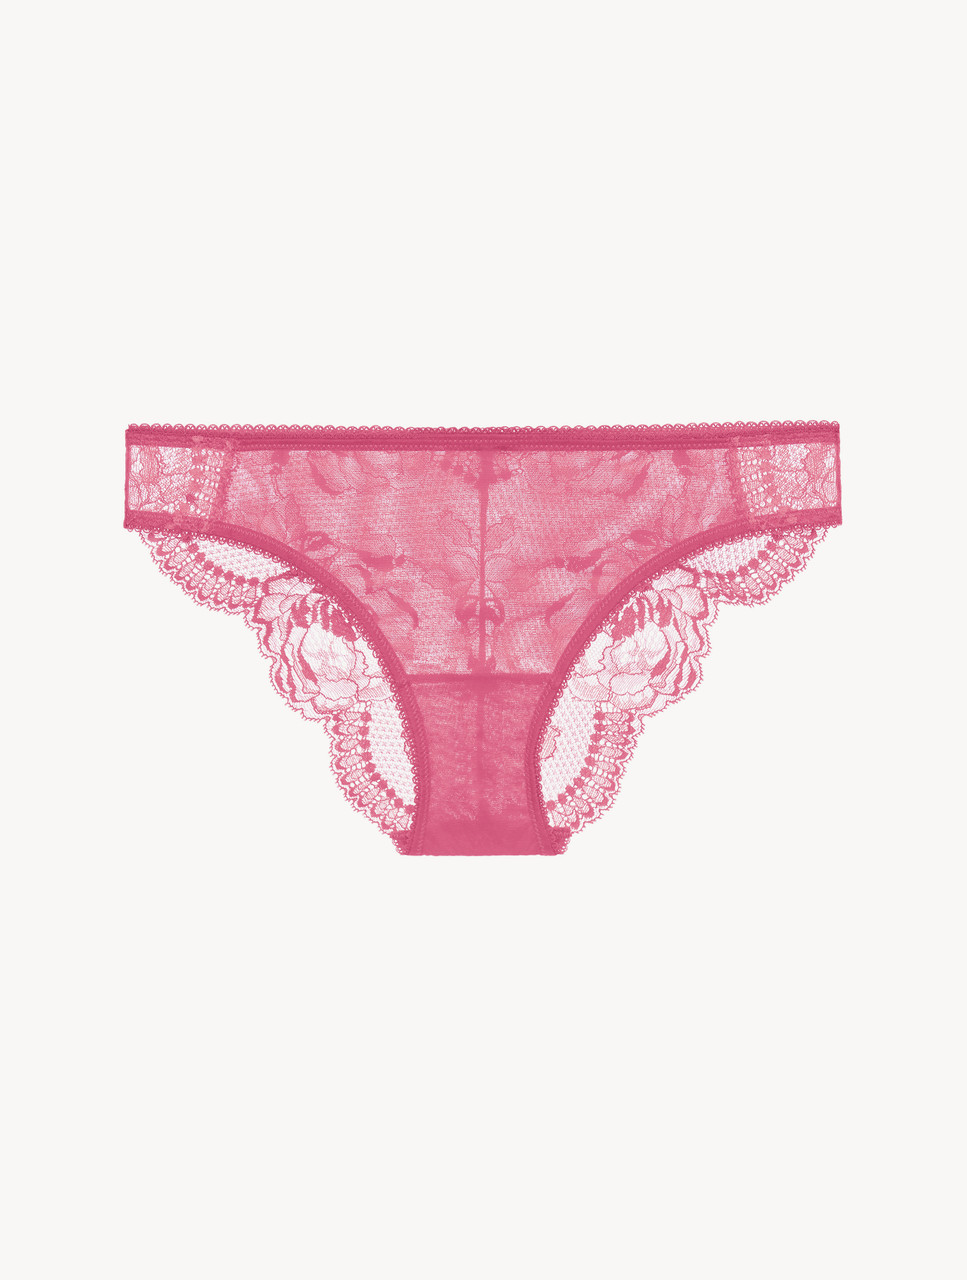 Luxury Lace Mid-Rise Knickers in Wild Orchid